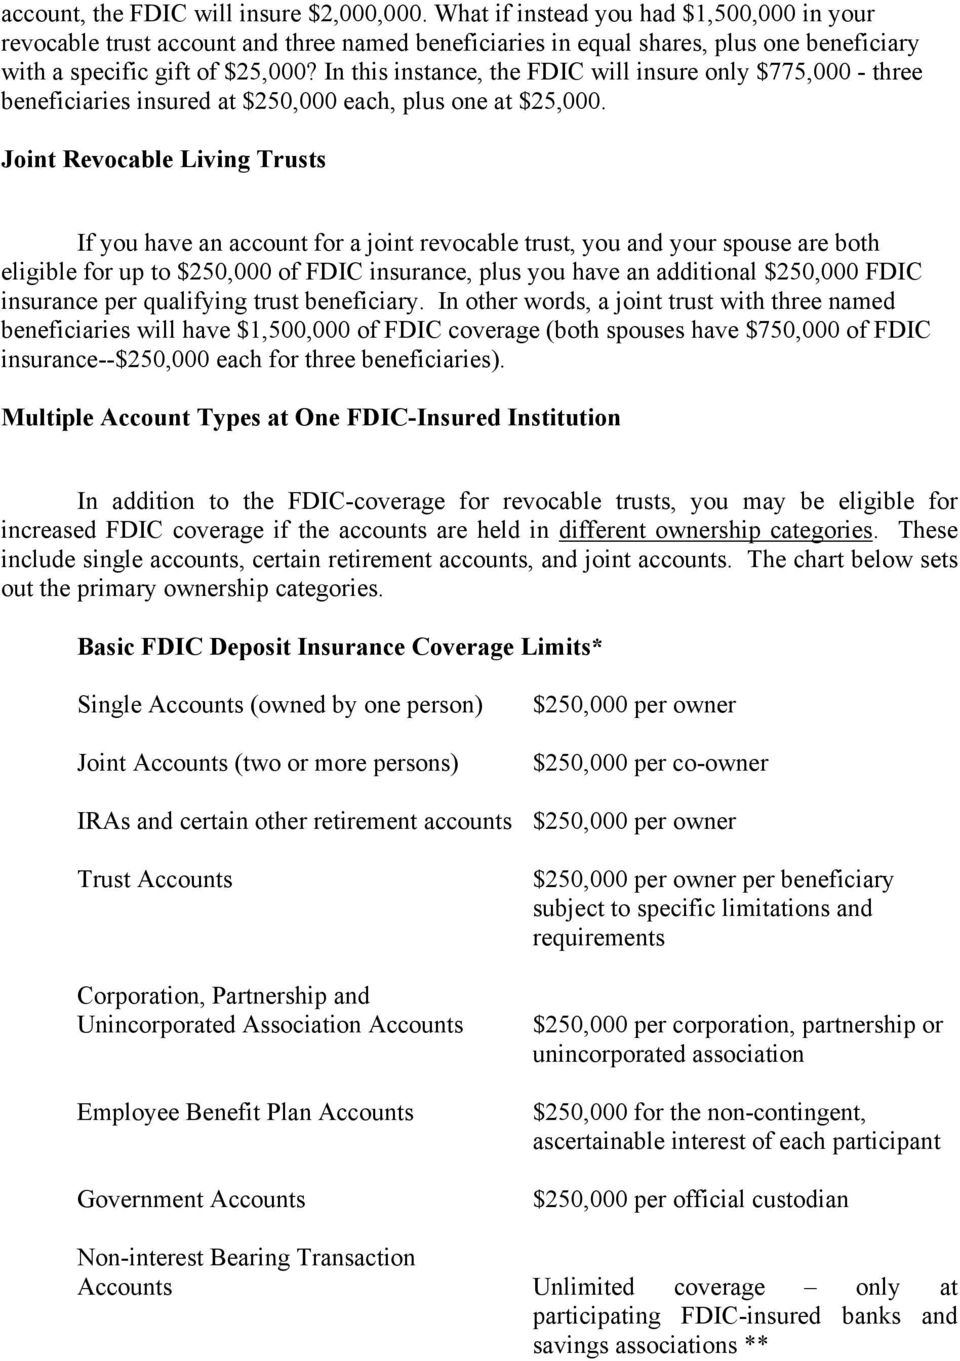 In this instance, the FDIC will insure only $775,000 - three beneficiaries insured at $250,000 each, plus one at $25,000.